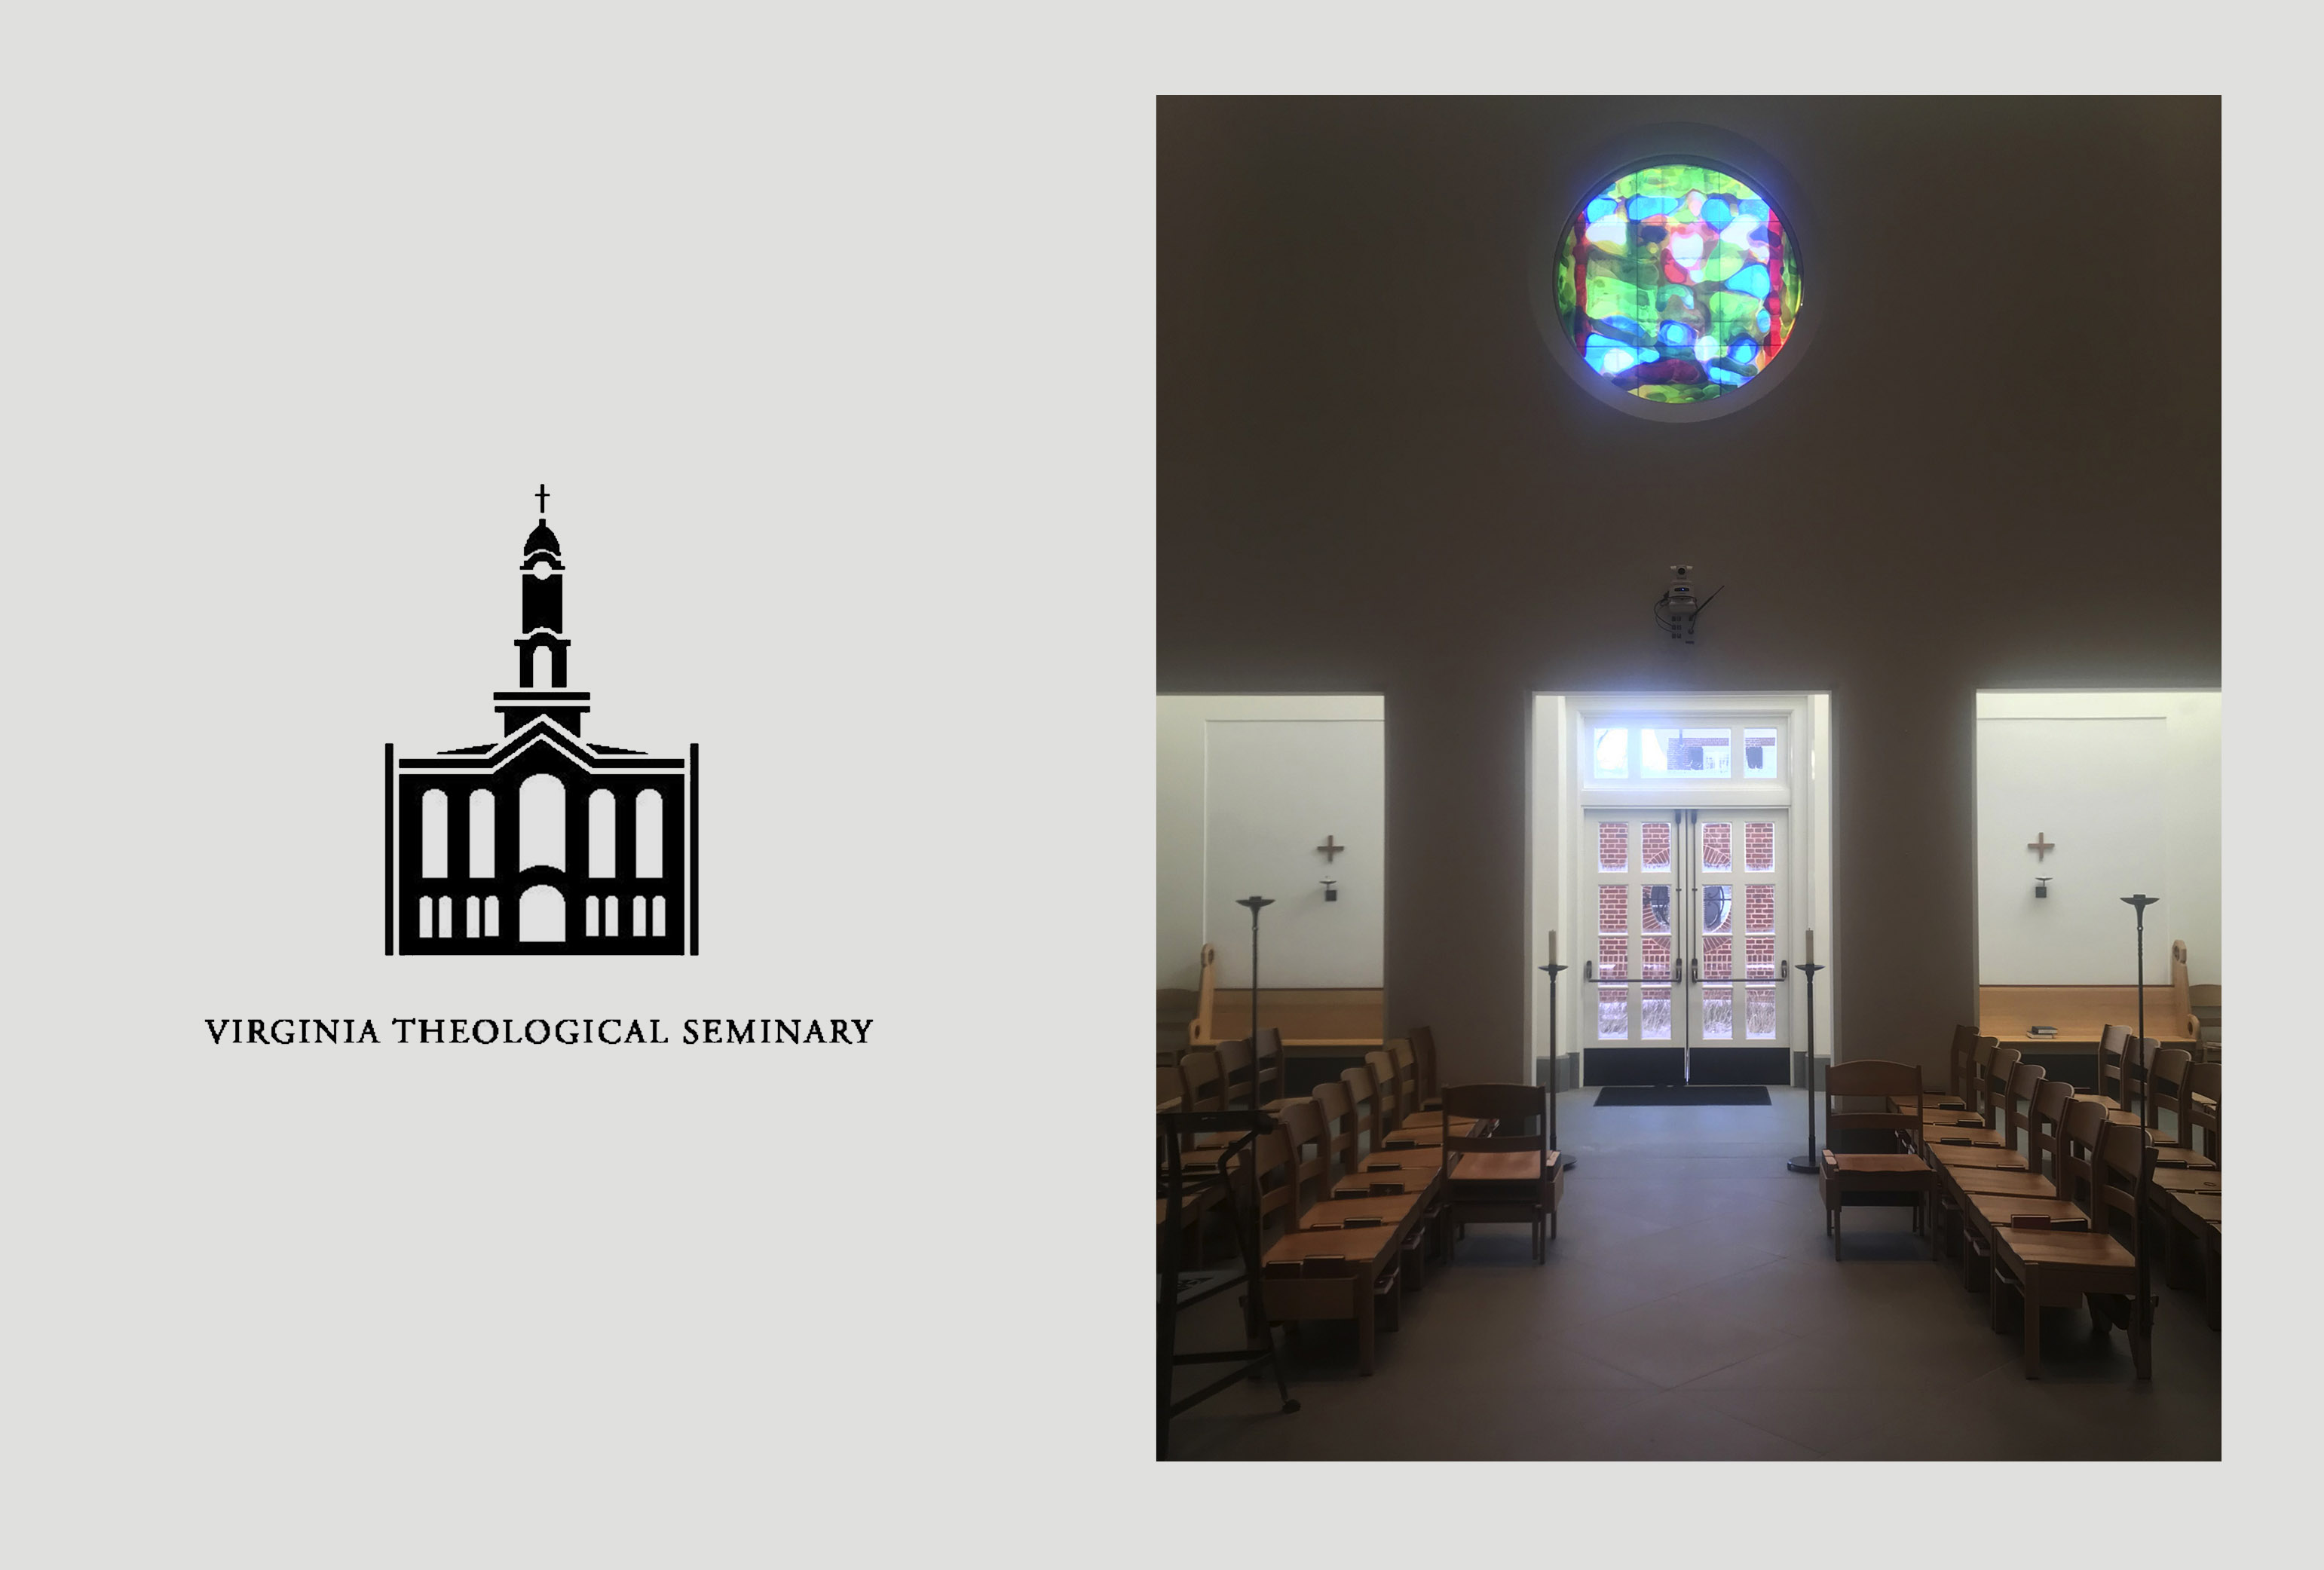 Stained-Glass Windows by Artist Brian Clarke Installed at Immanuel Chapel